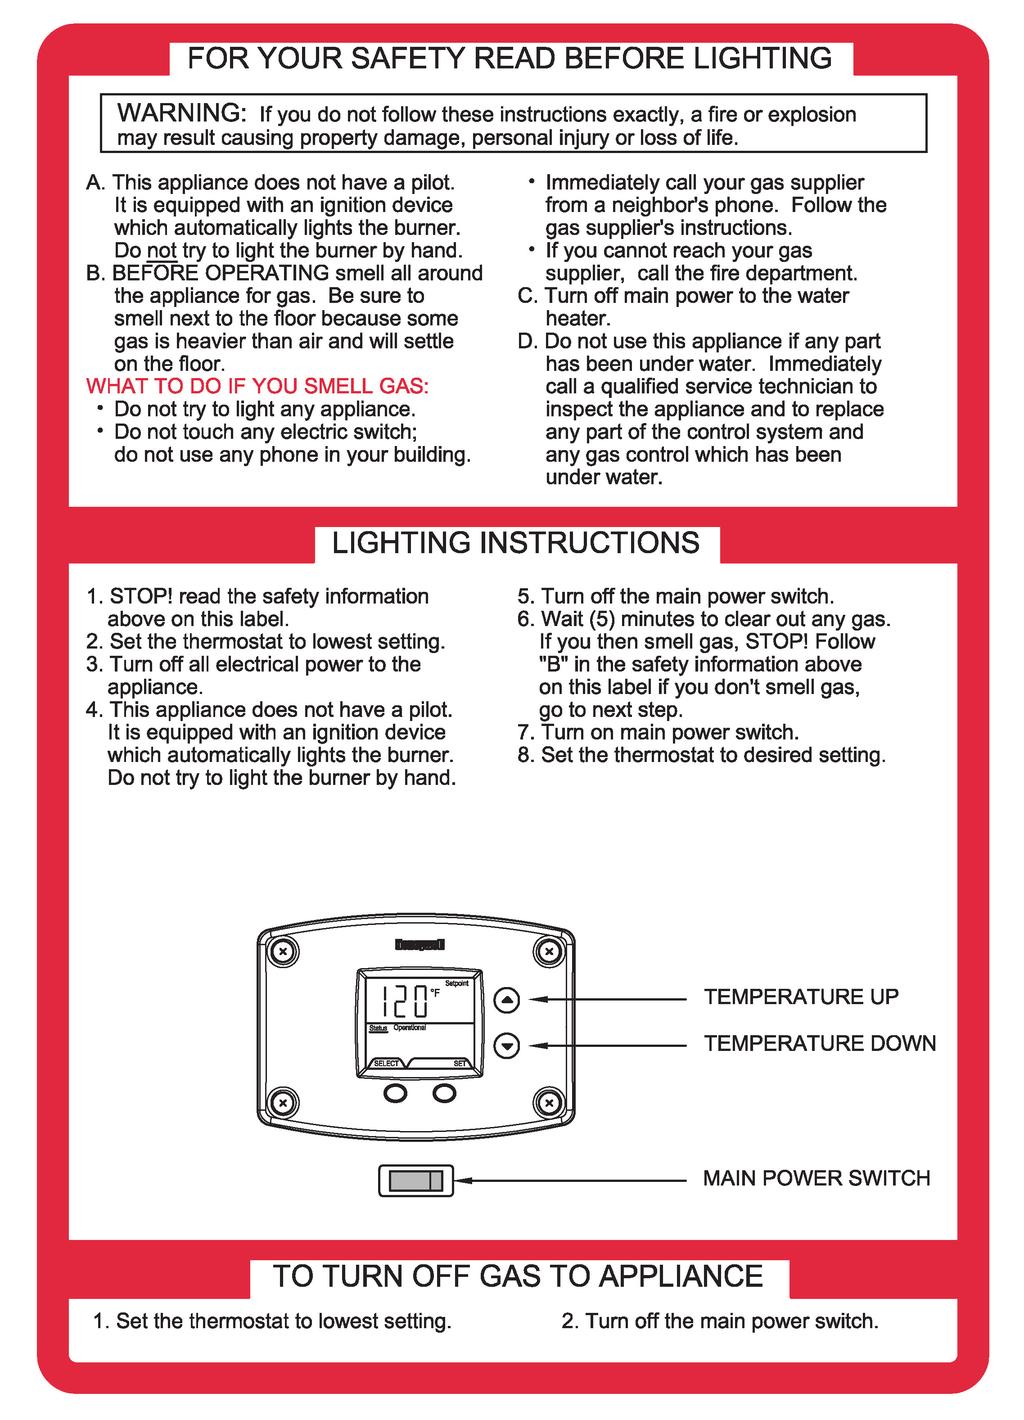 LIGHTING AND SHUT-DOWN INSTRUCTIONS Figure 10. Lighting Instruction Label. Table 4. TEMPERATURE ADJUSTMENT.